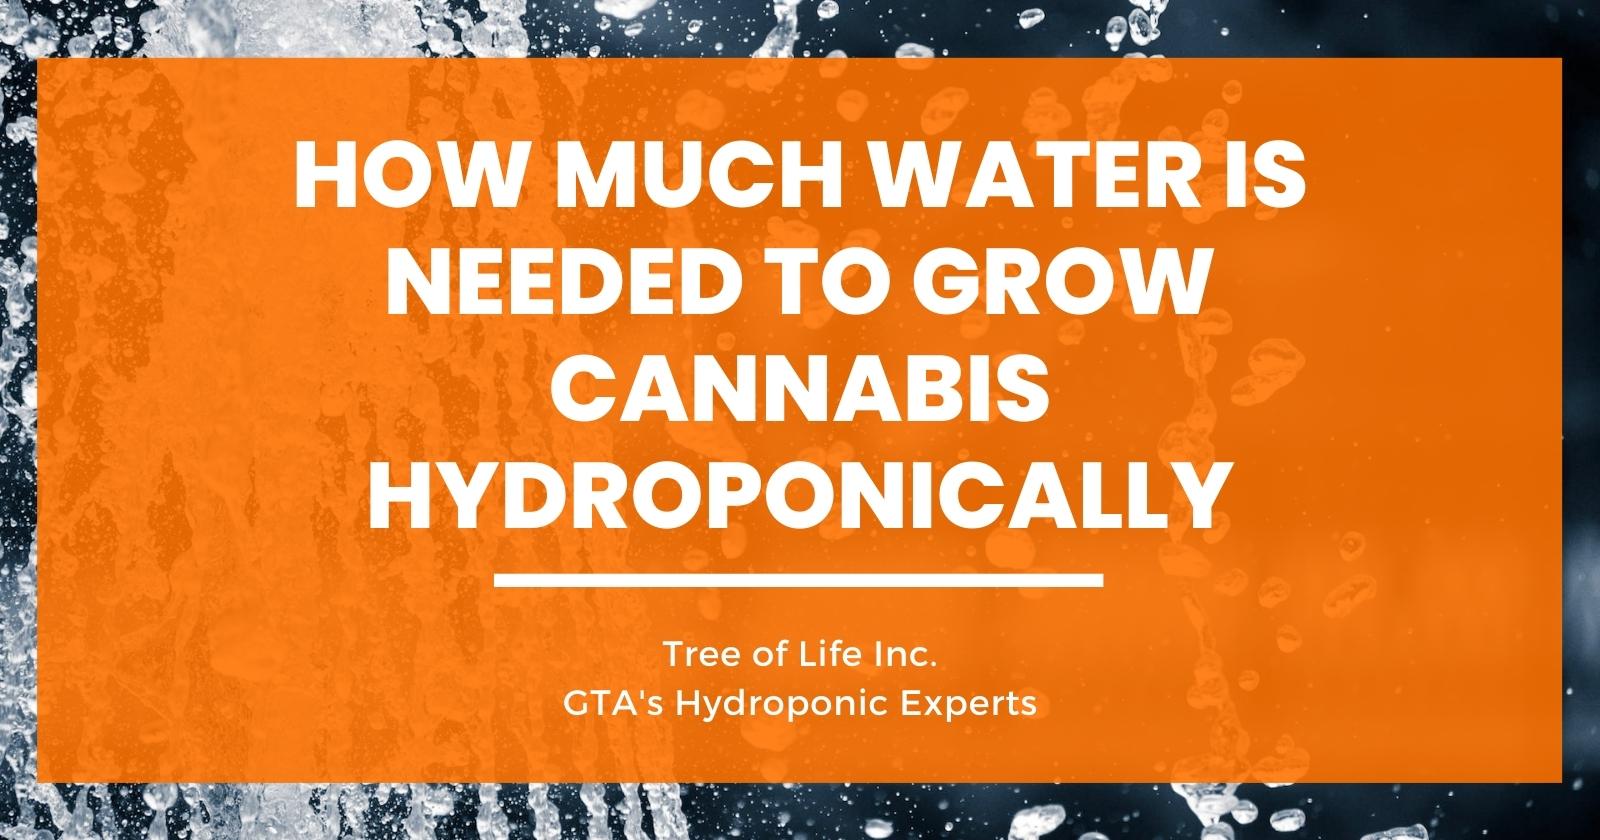 How Much Water Is Needed to Grow Cannabis Hydroponically